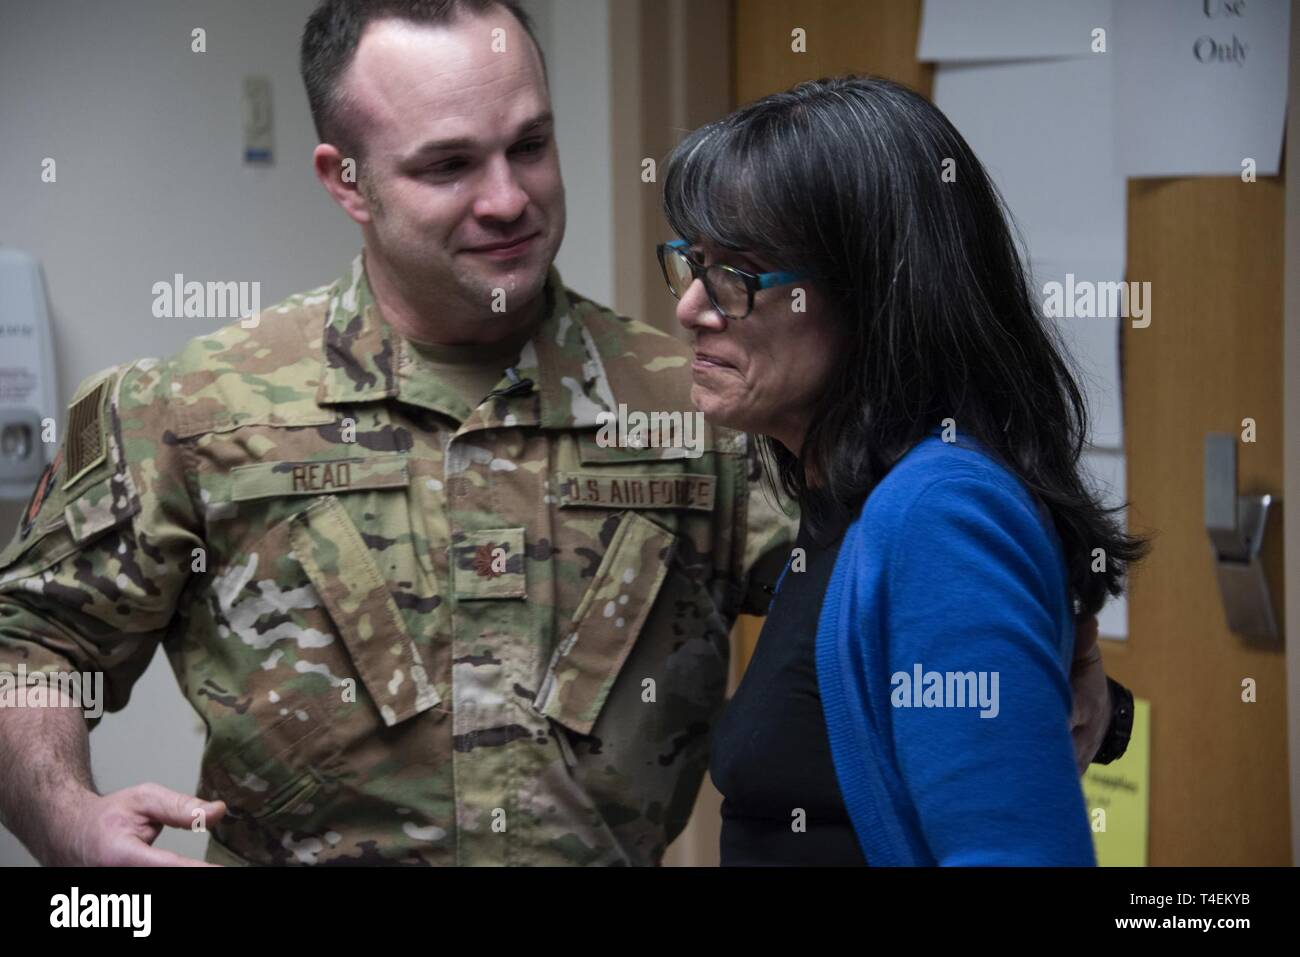 Air Force Maj. (Dr.) Matthew Read, acting Extracorporeal Membrane Oxygenation medical director, shares an emotional moment with former patient, Rita Ibanez, at Brooke Army Medical Center, Fort Sam Houston, Texas, March 22, 2019. Ibanez met with Read and other members of the ECMO team to thank them for the care she received in 2015. Stock Photo